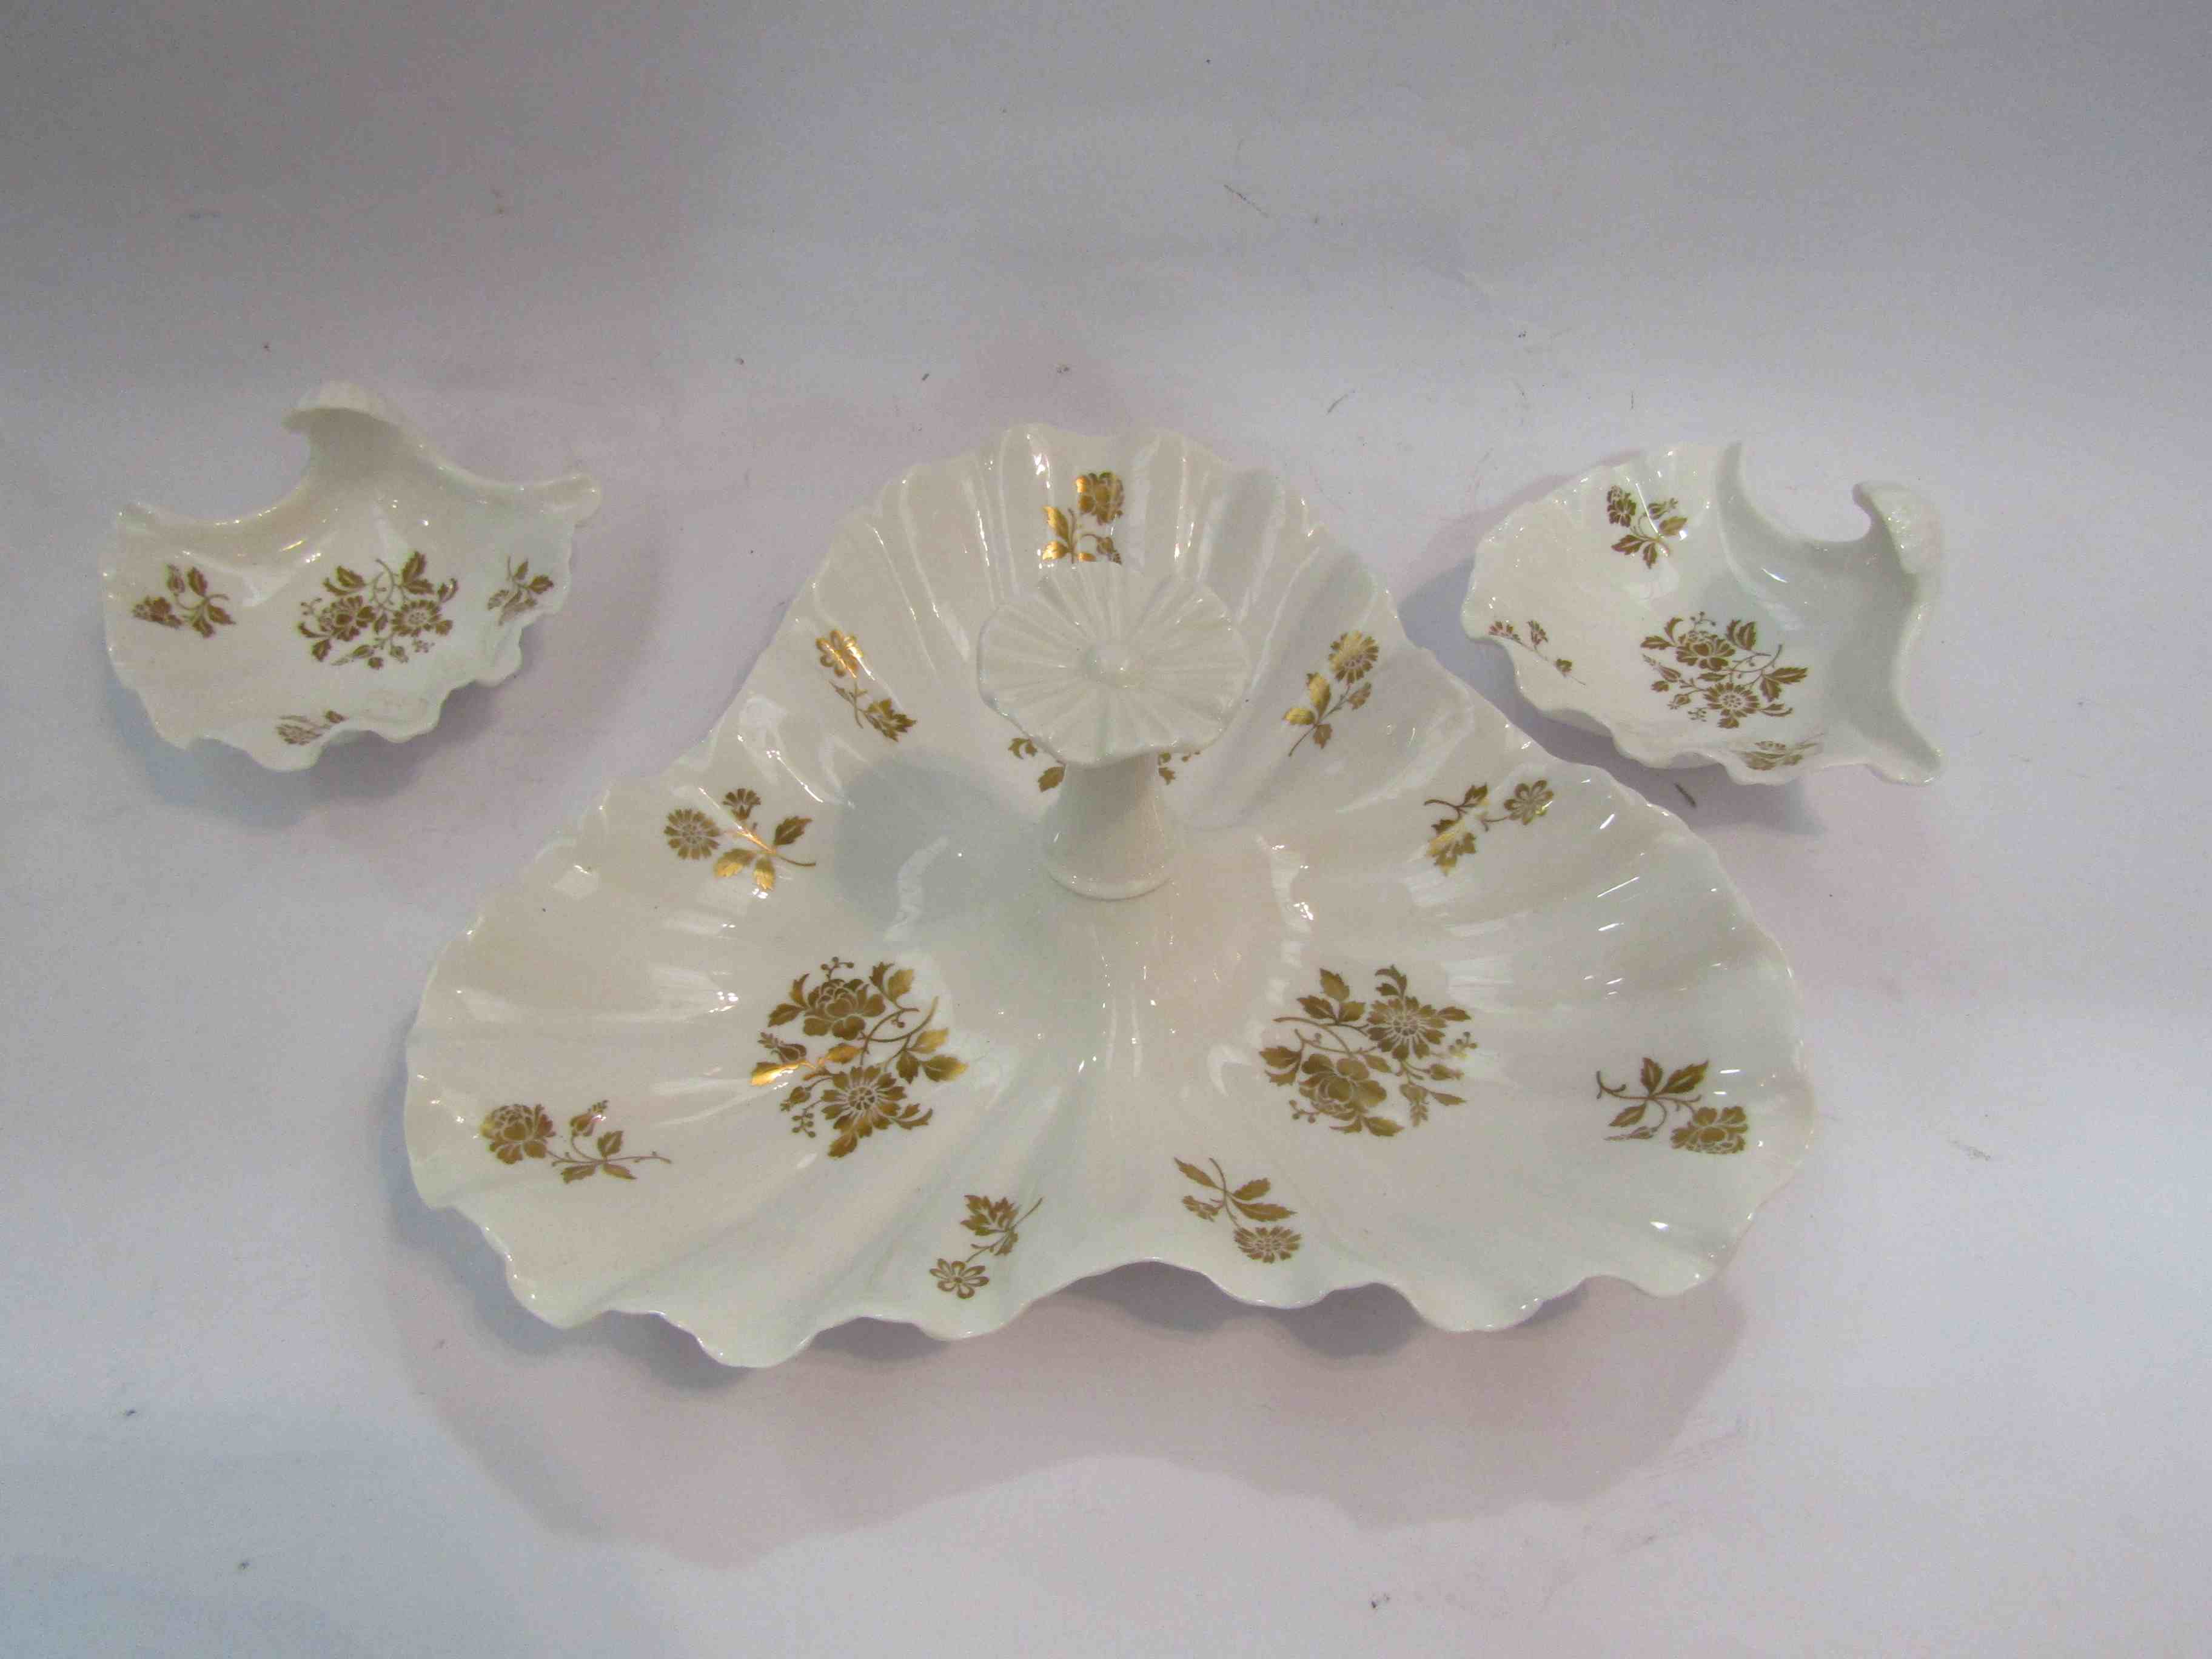 Spode centre dish and associated Spode dishes (5)